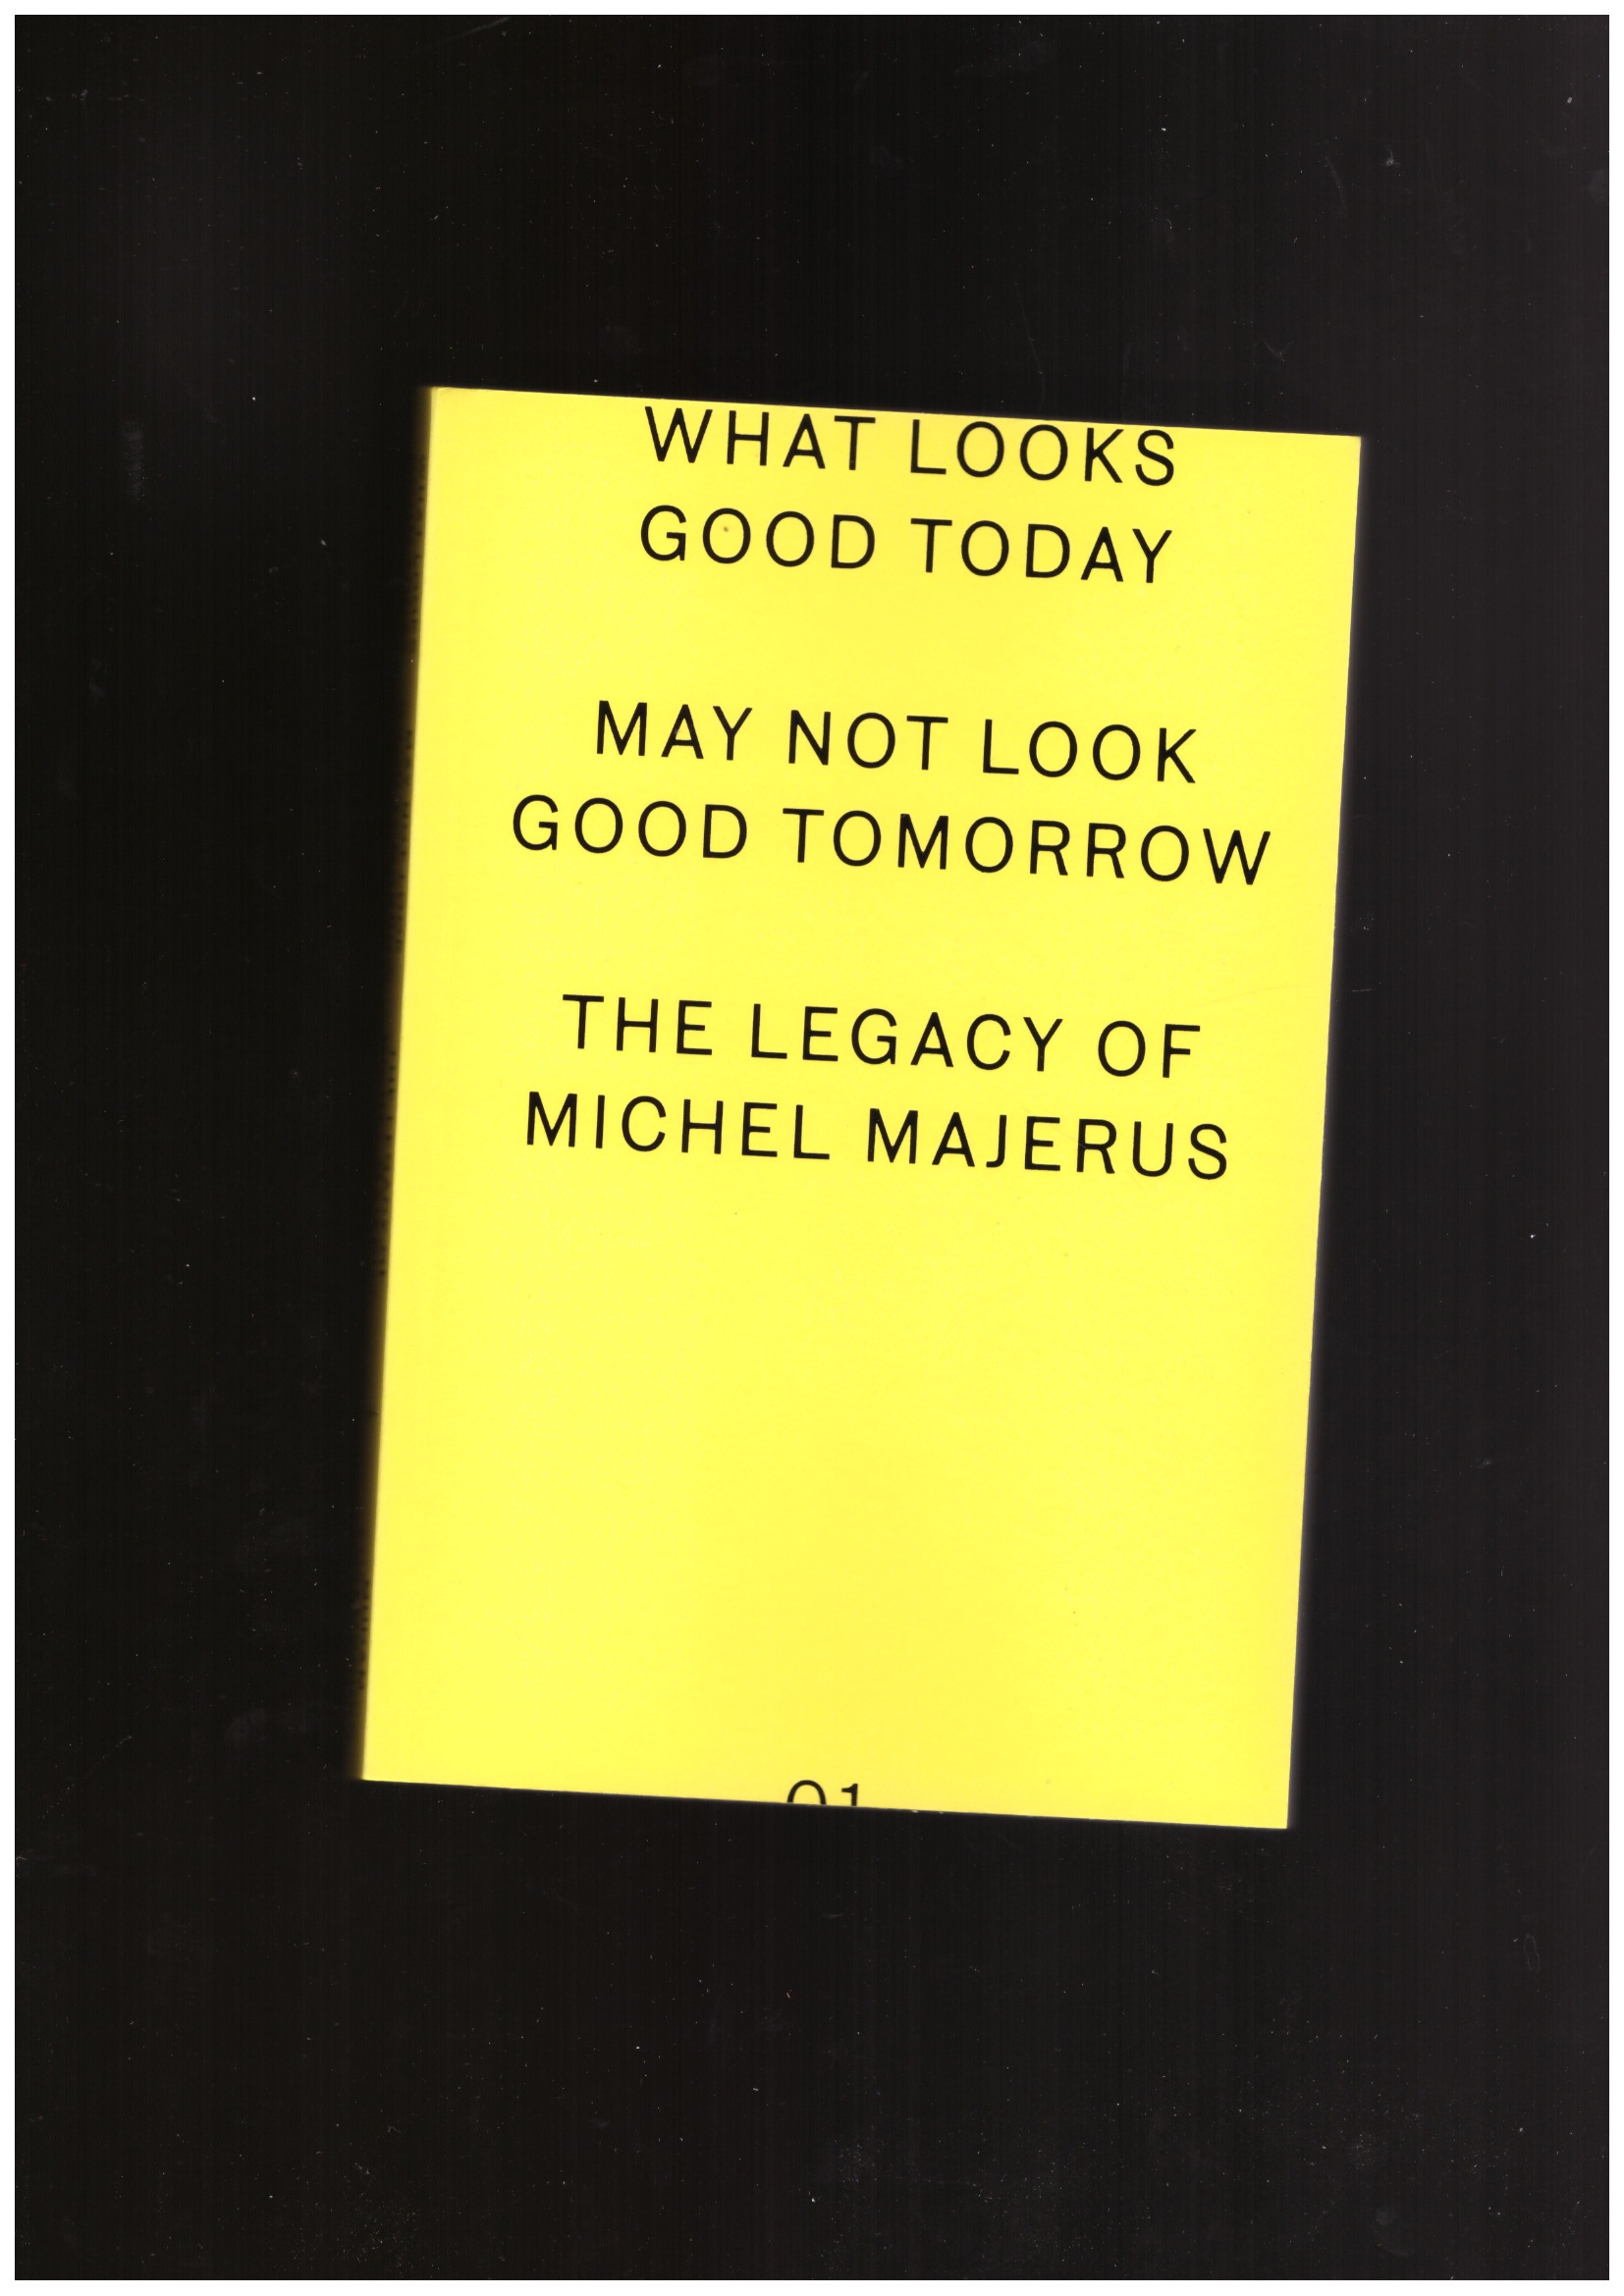 STEINBRUGGE, Bettina (ed.) - what looks good today may not look good tomorrow - The Legacy of Michel Majerus